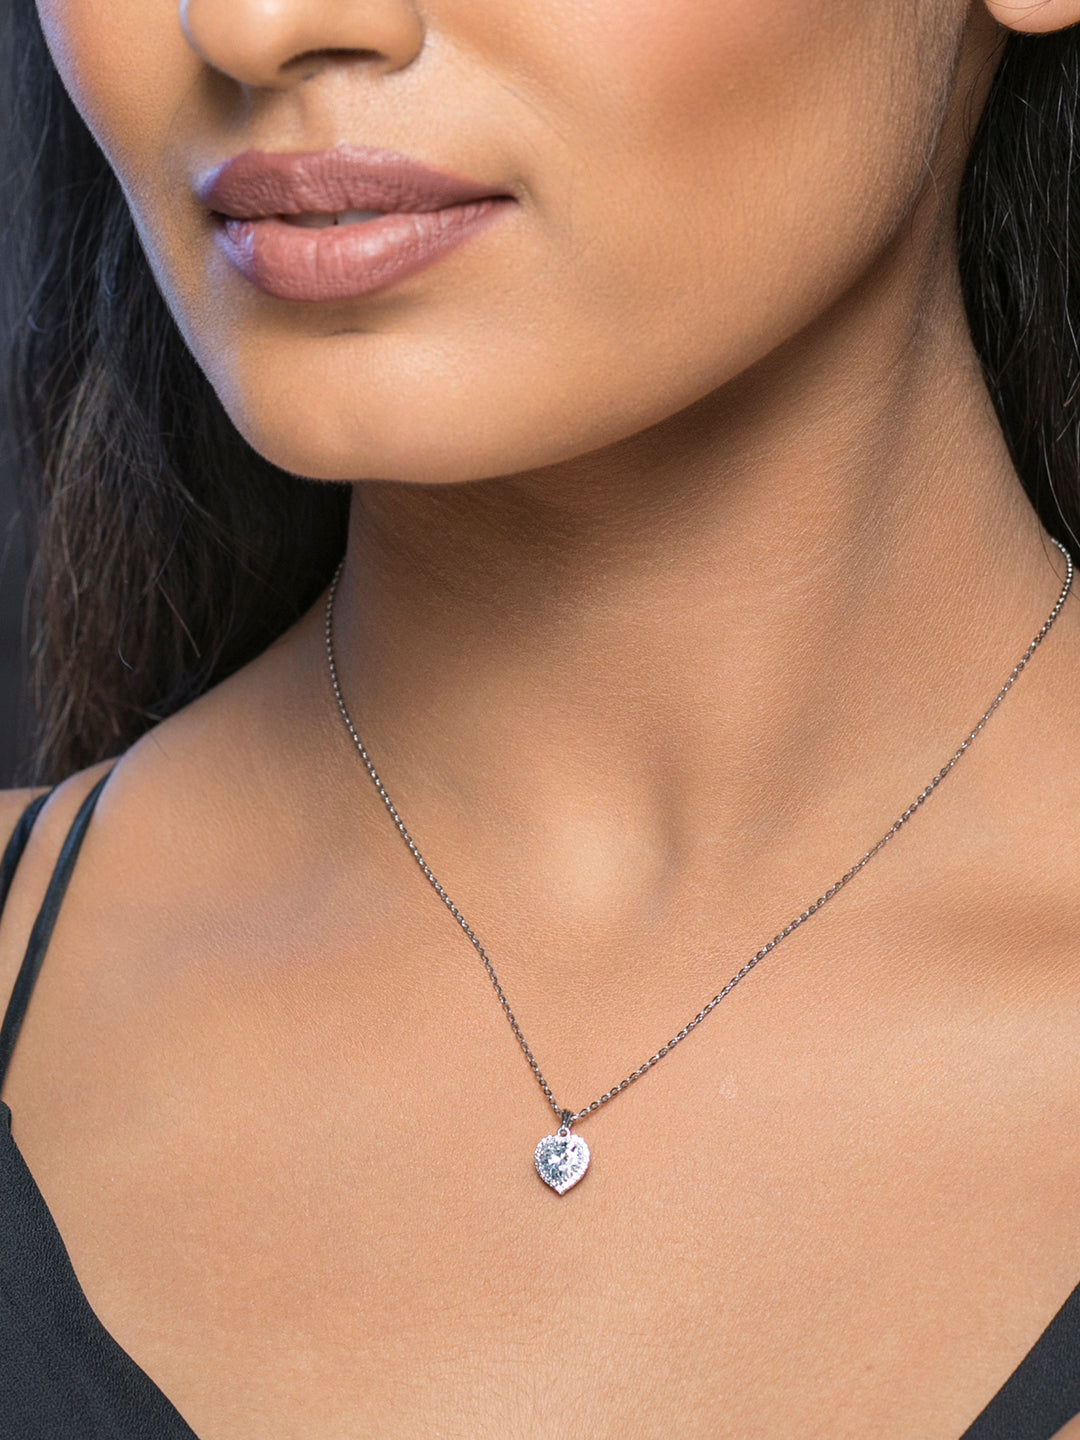 Sheer by Priyaasi Heart Solitaire Sterling Silver Necklace